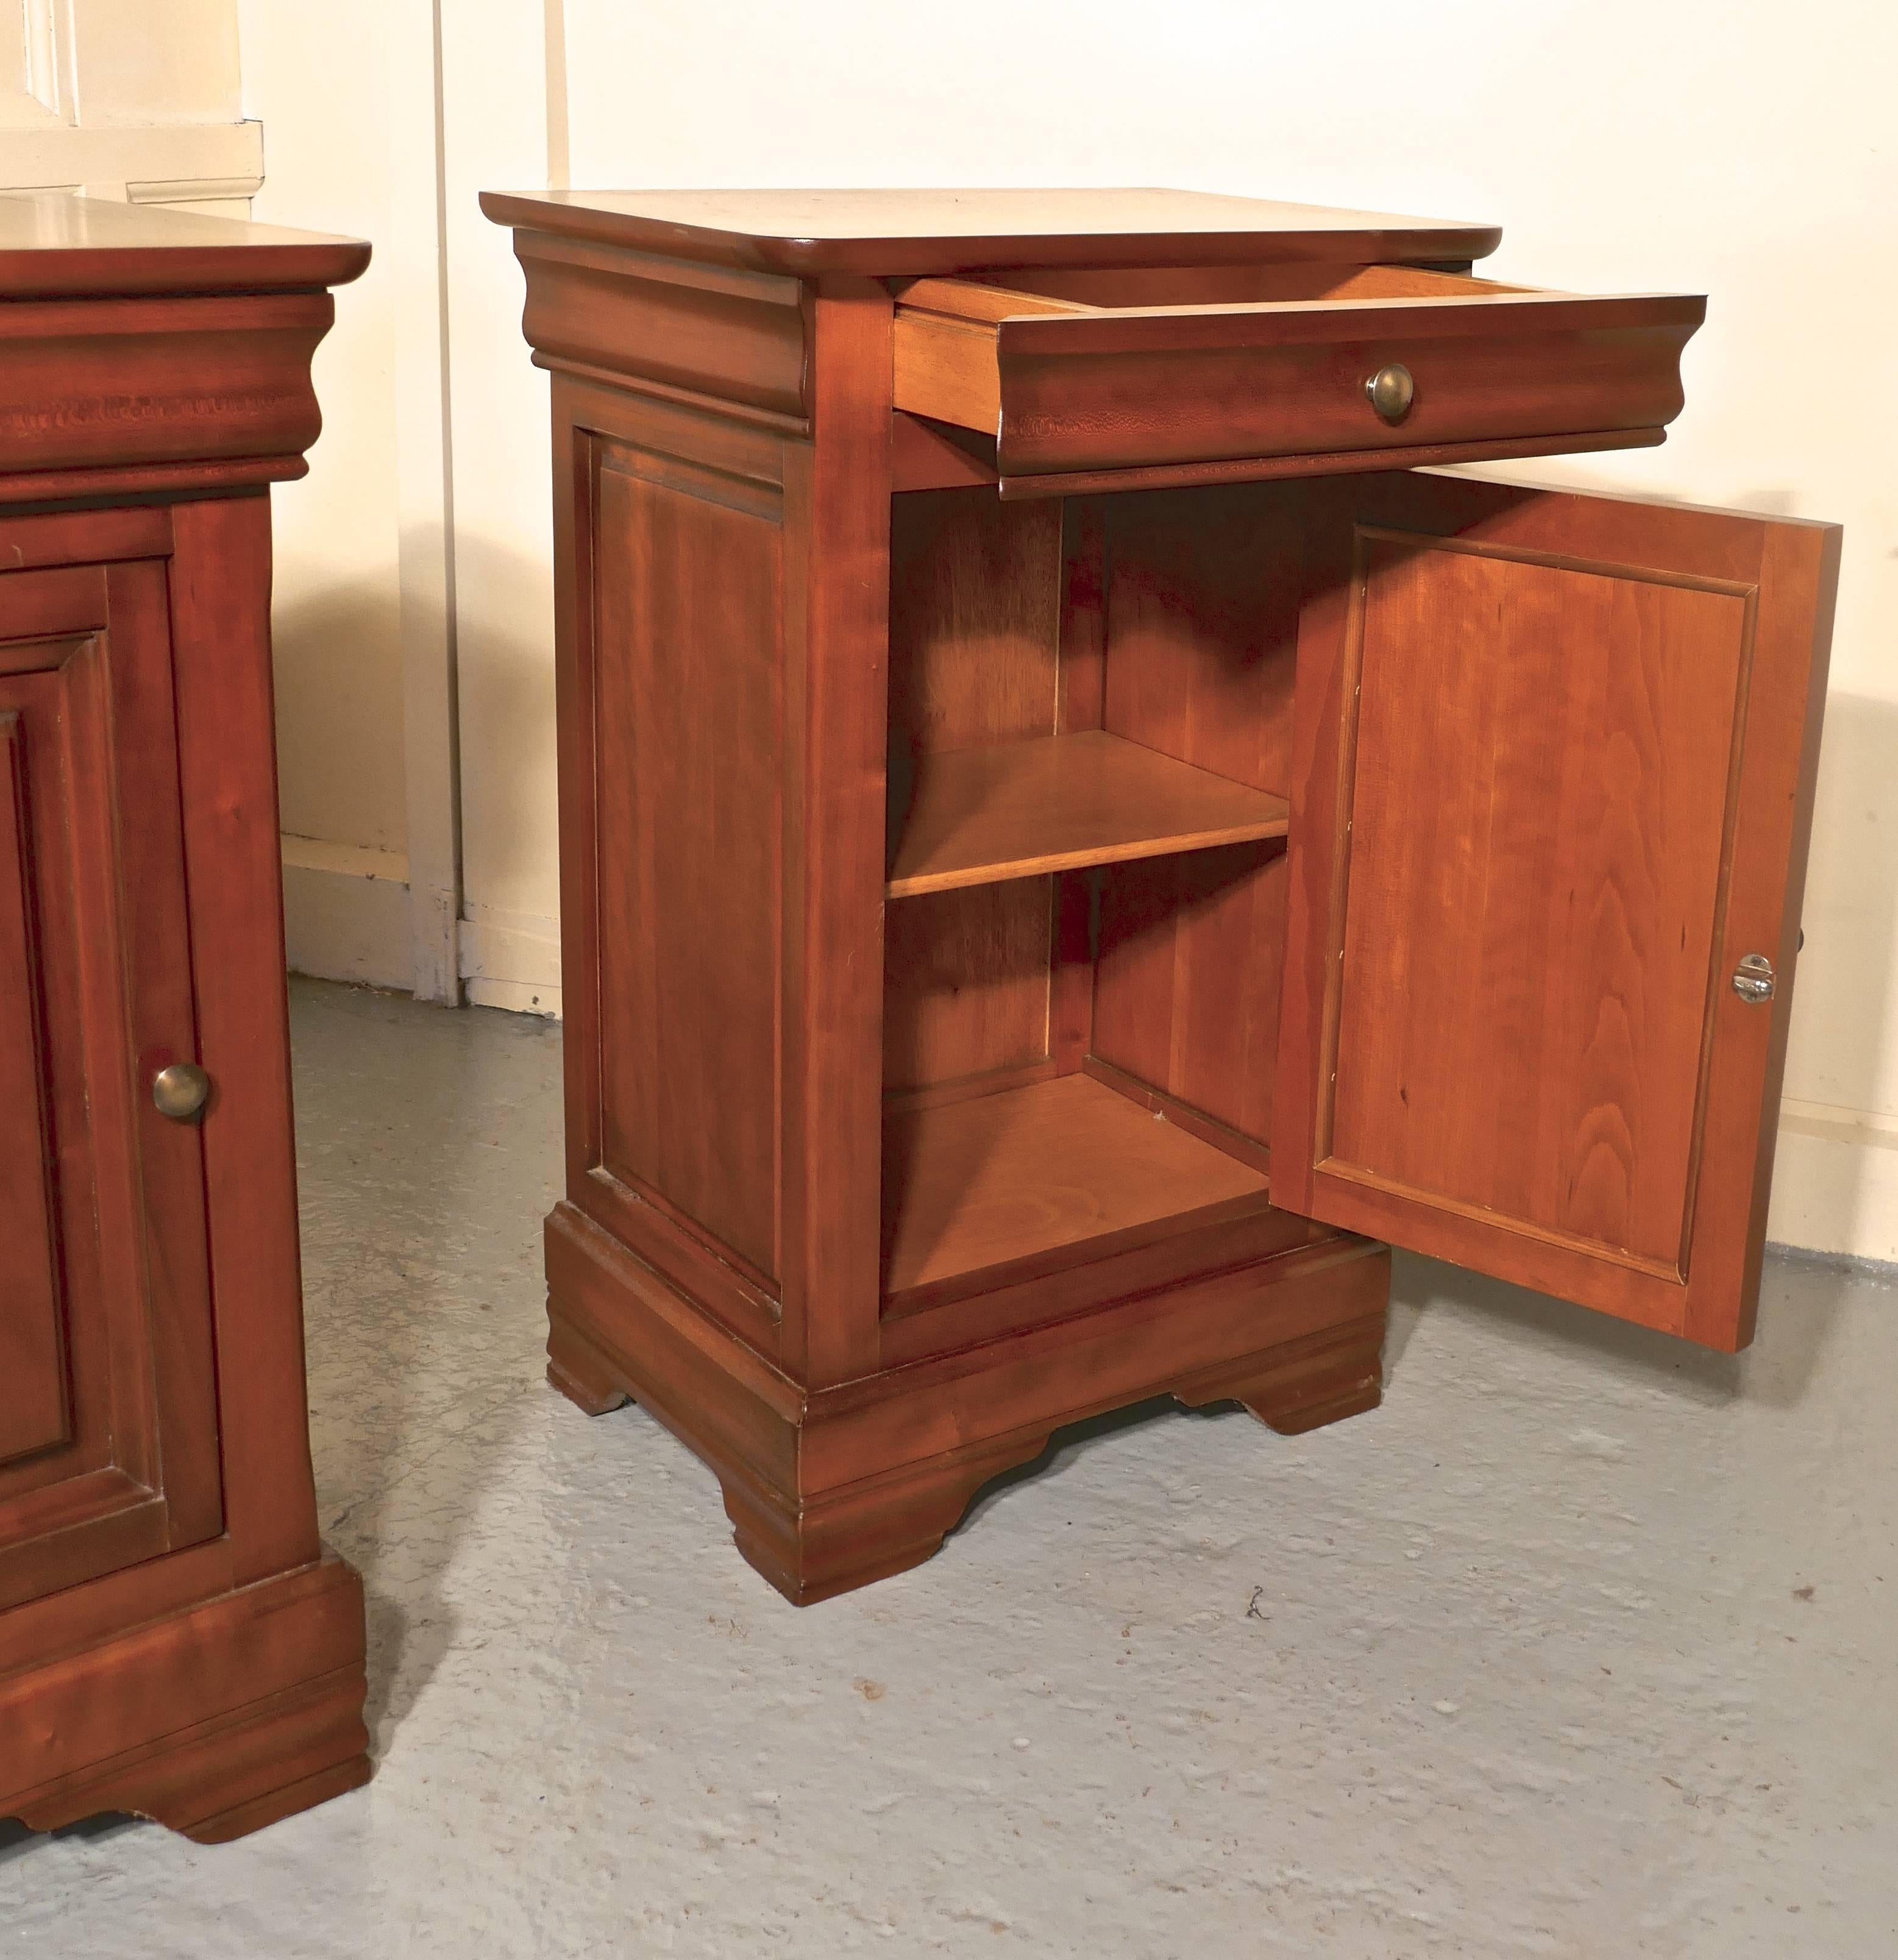 A pair of French cherrywood bedside cupboards or night tables

These are very attractive pieces they are made in well figured cherry, they each have a panelled Door to the front with a drawer over, there is a shelf inside, and they stand on a